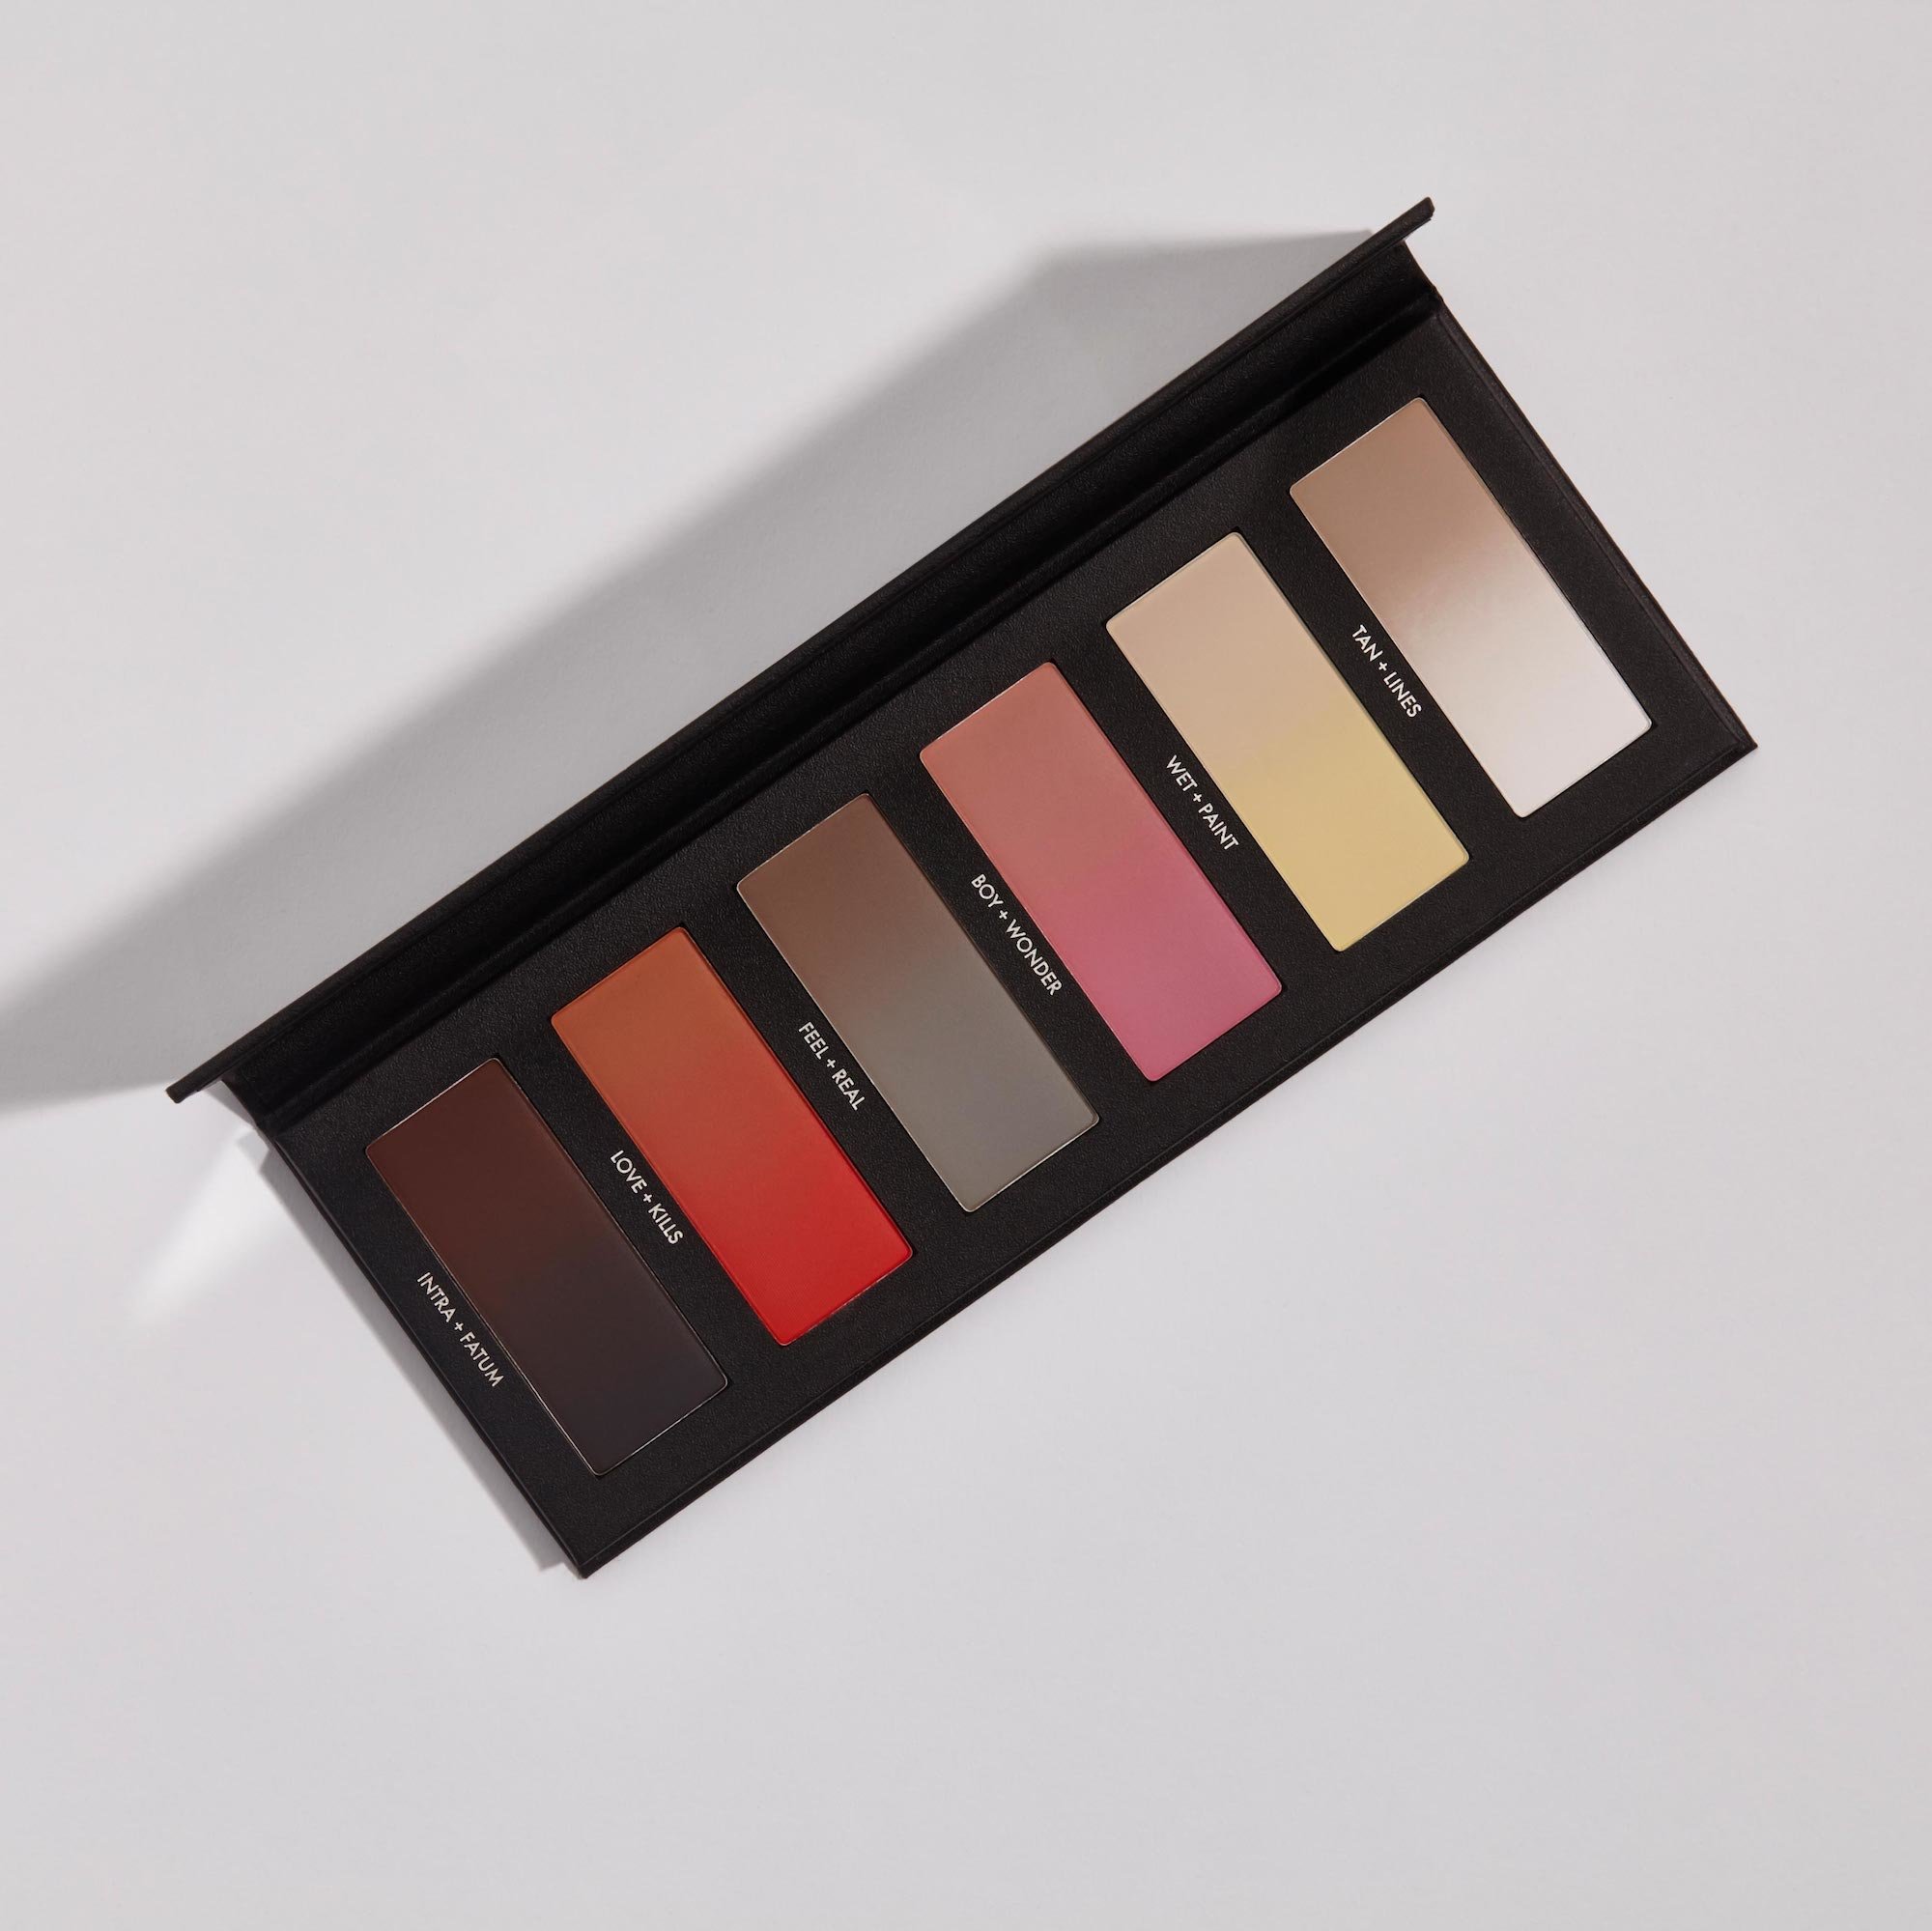 Alternate product image for Beautopsy Palette shown with the description.